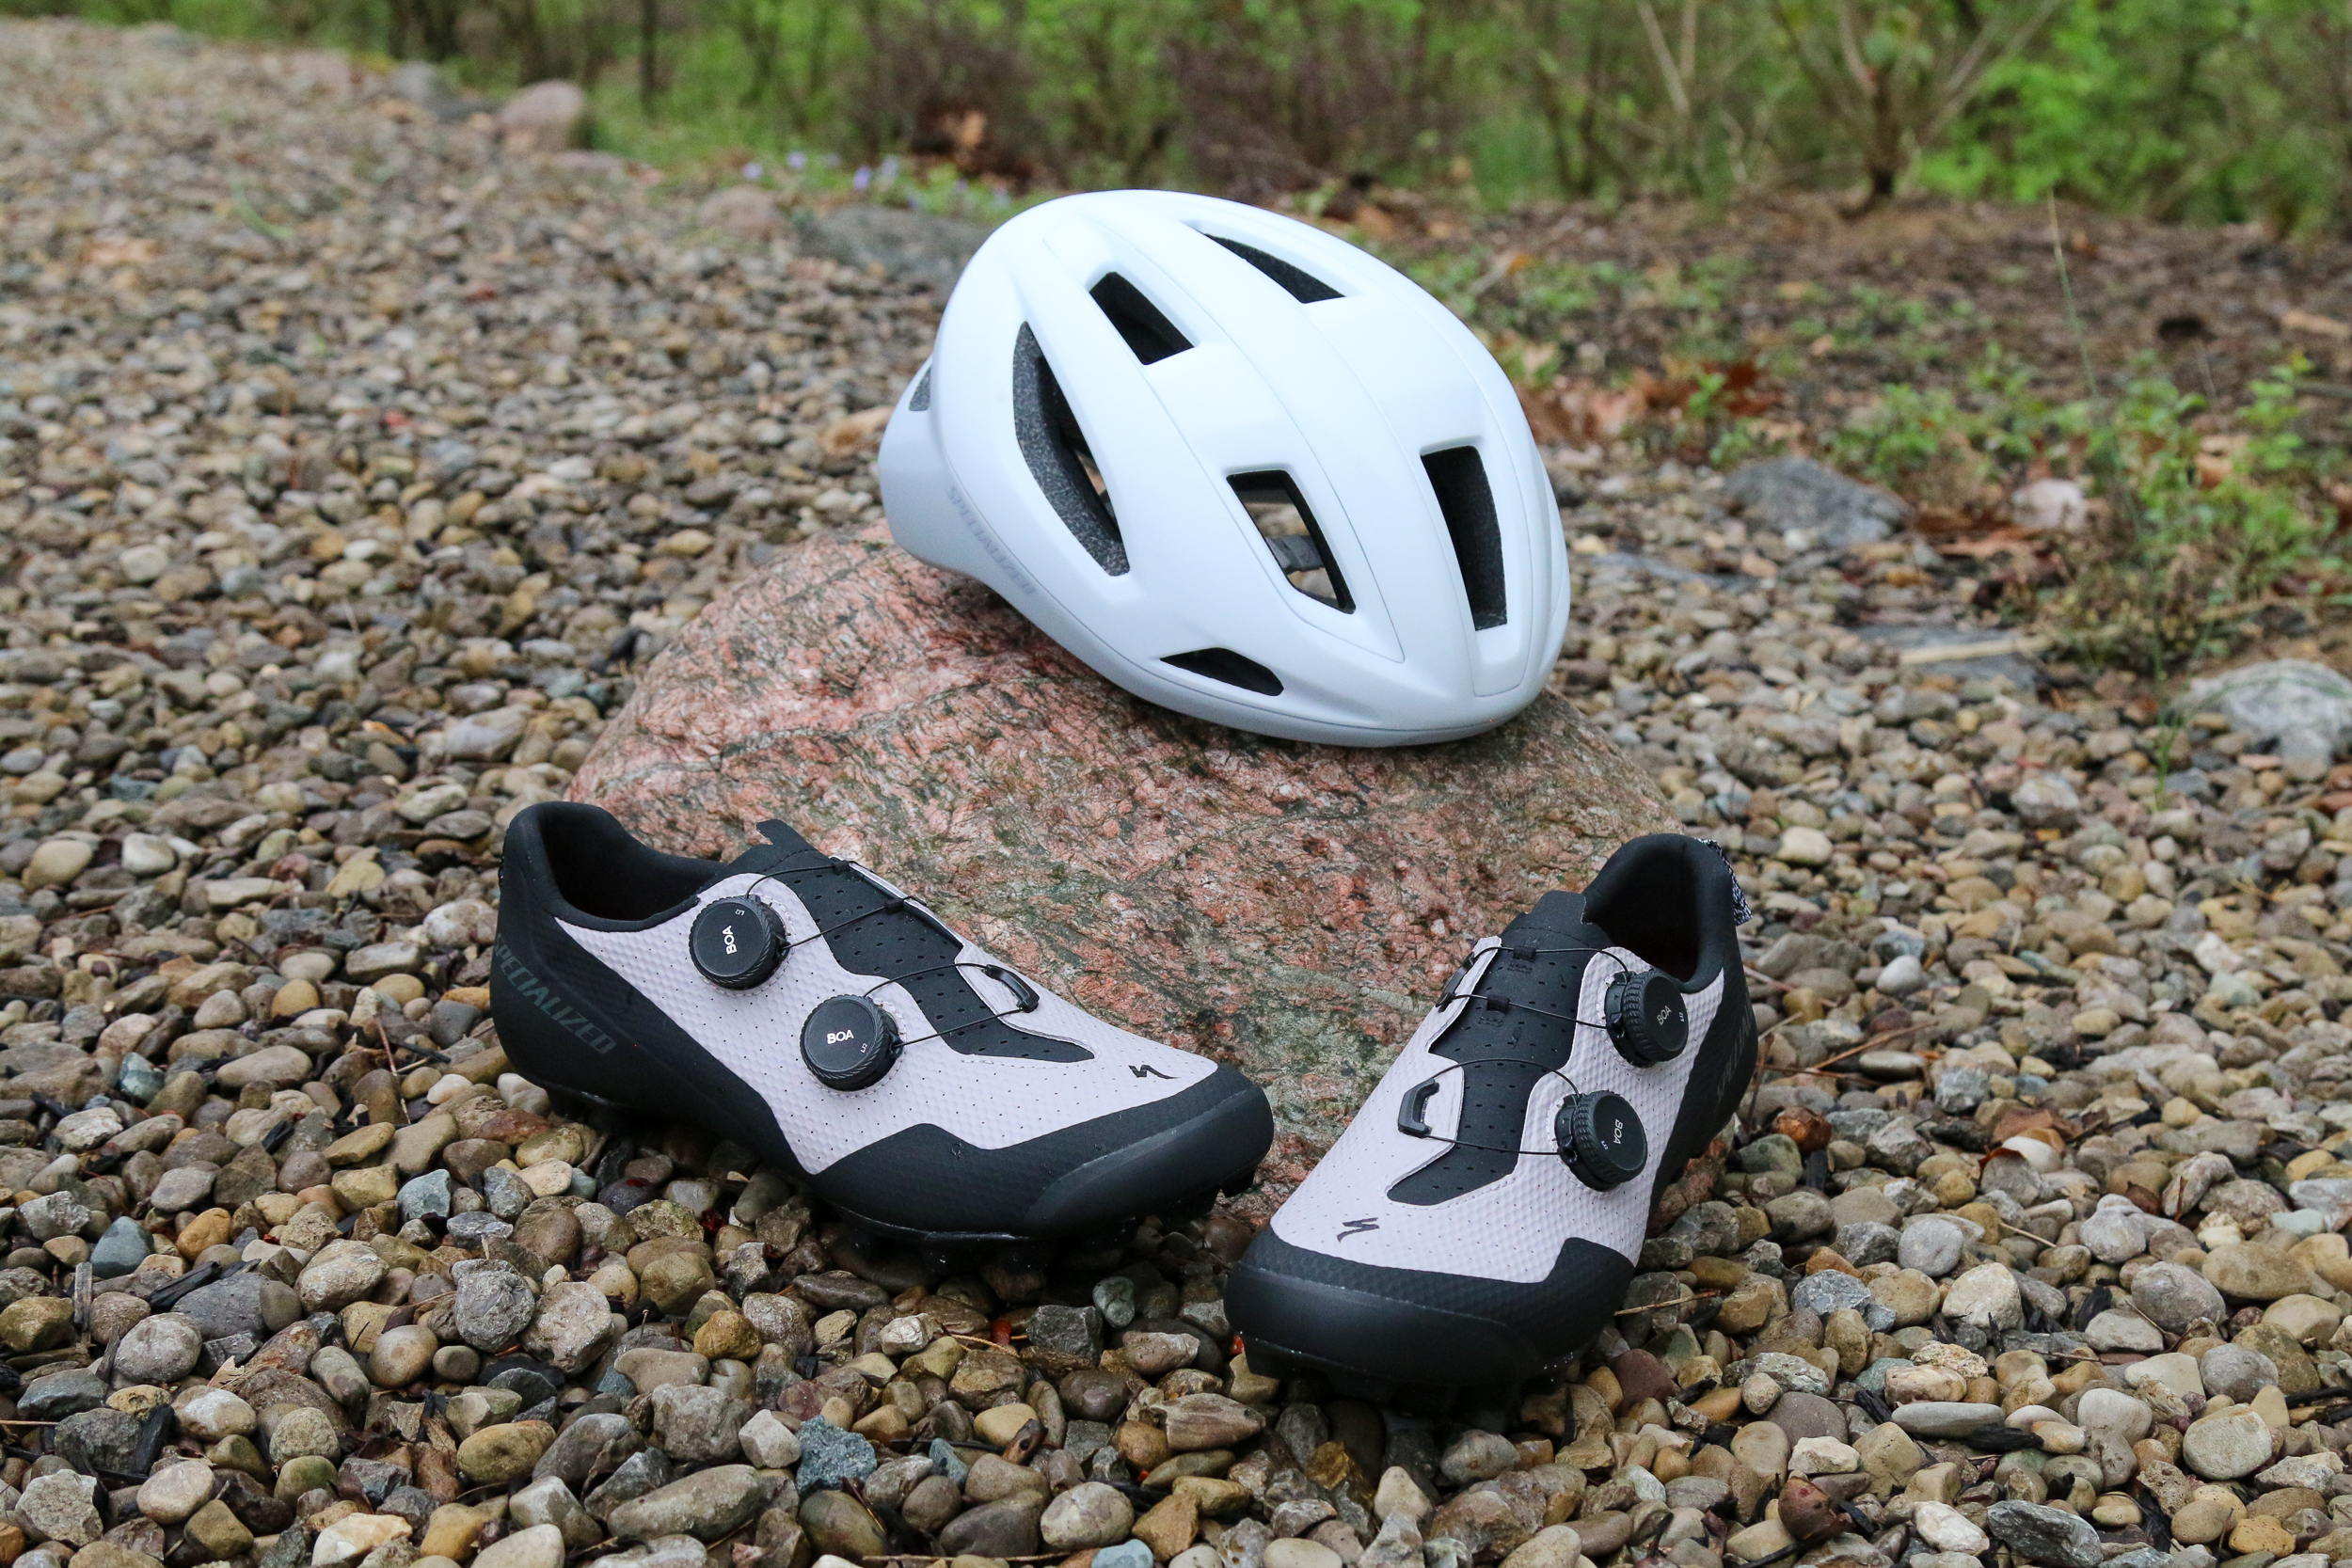 Specialized Search Gravel Helmet and Recon shoes